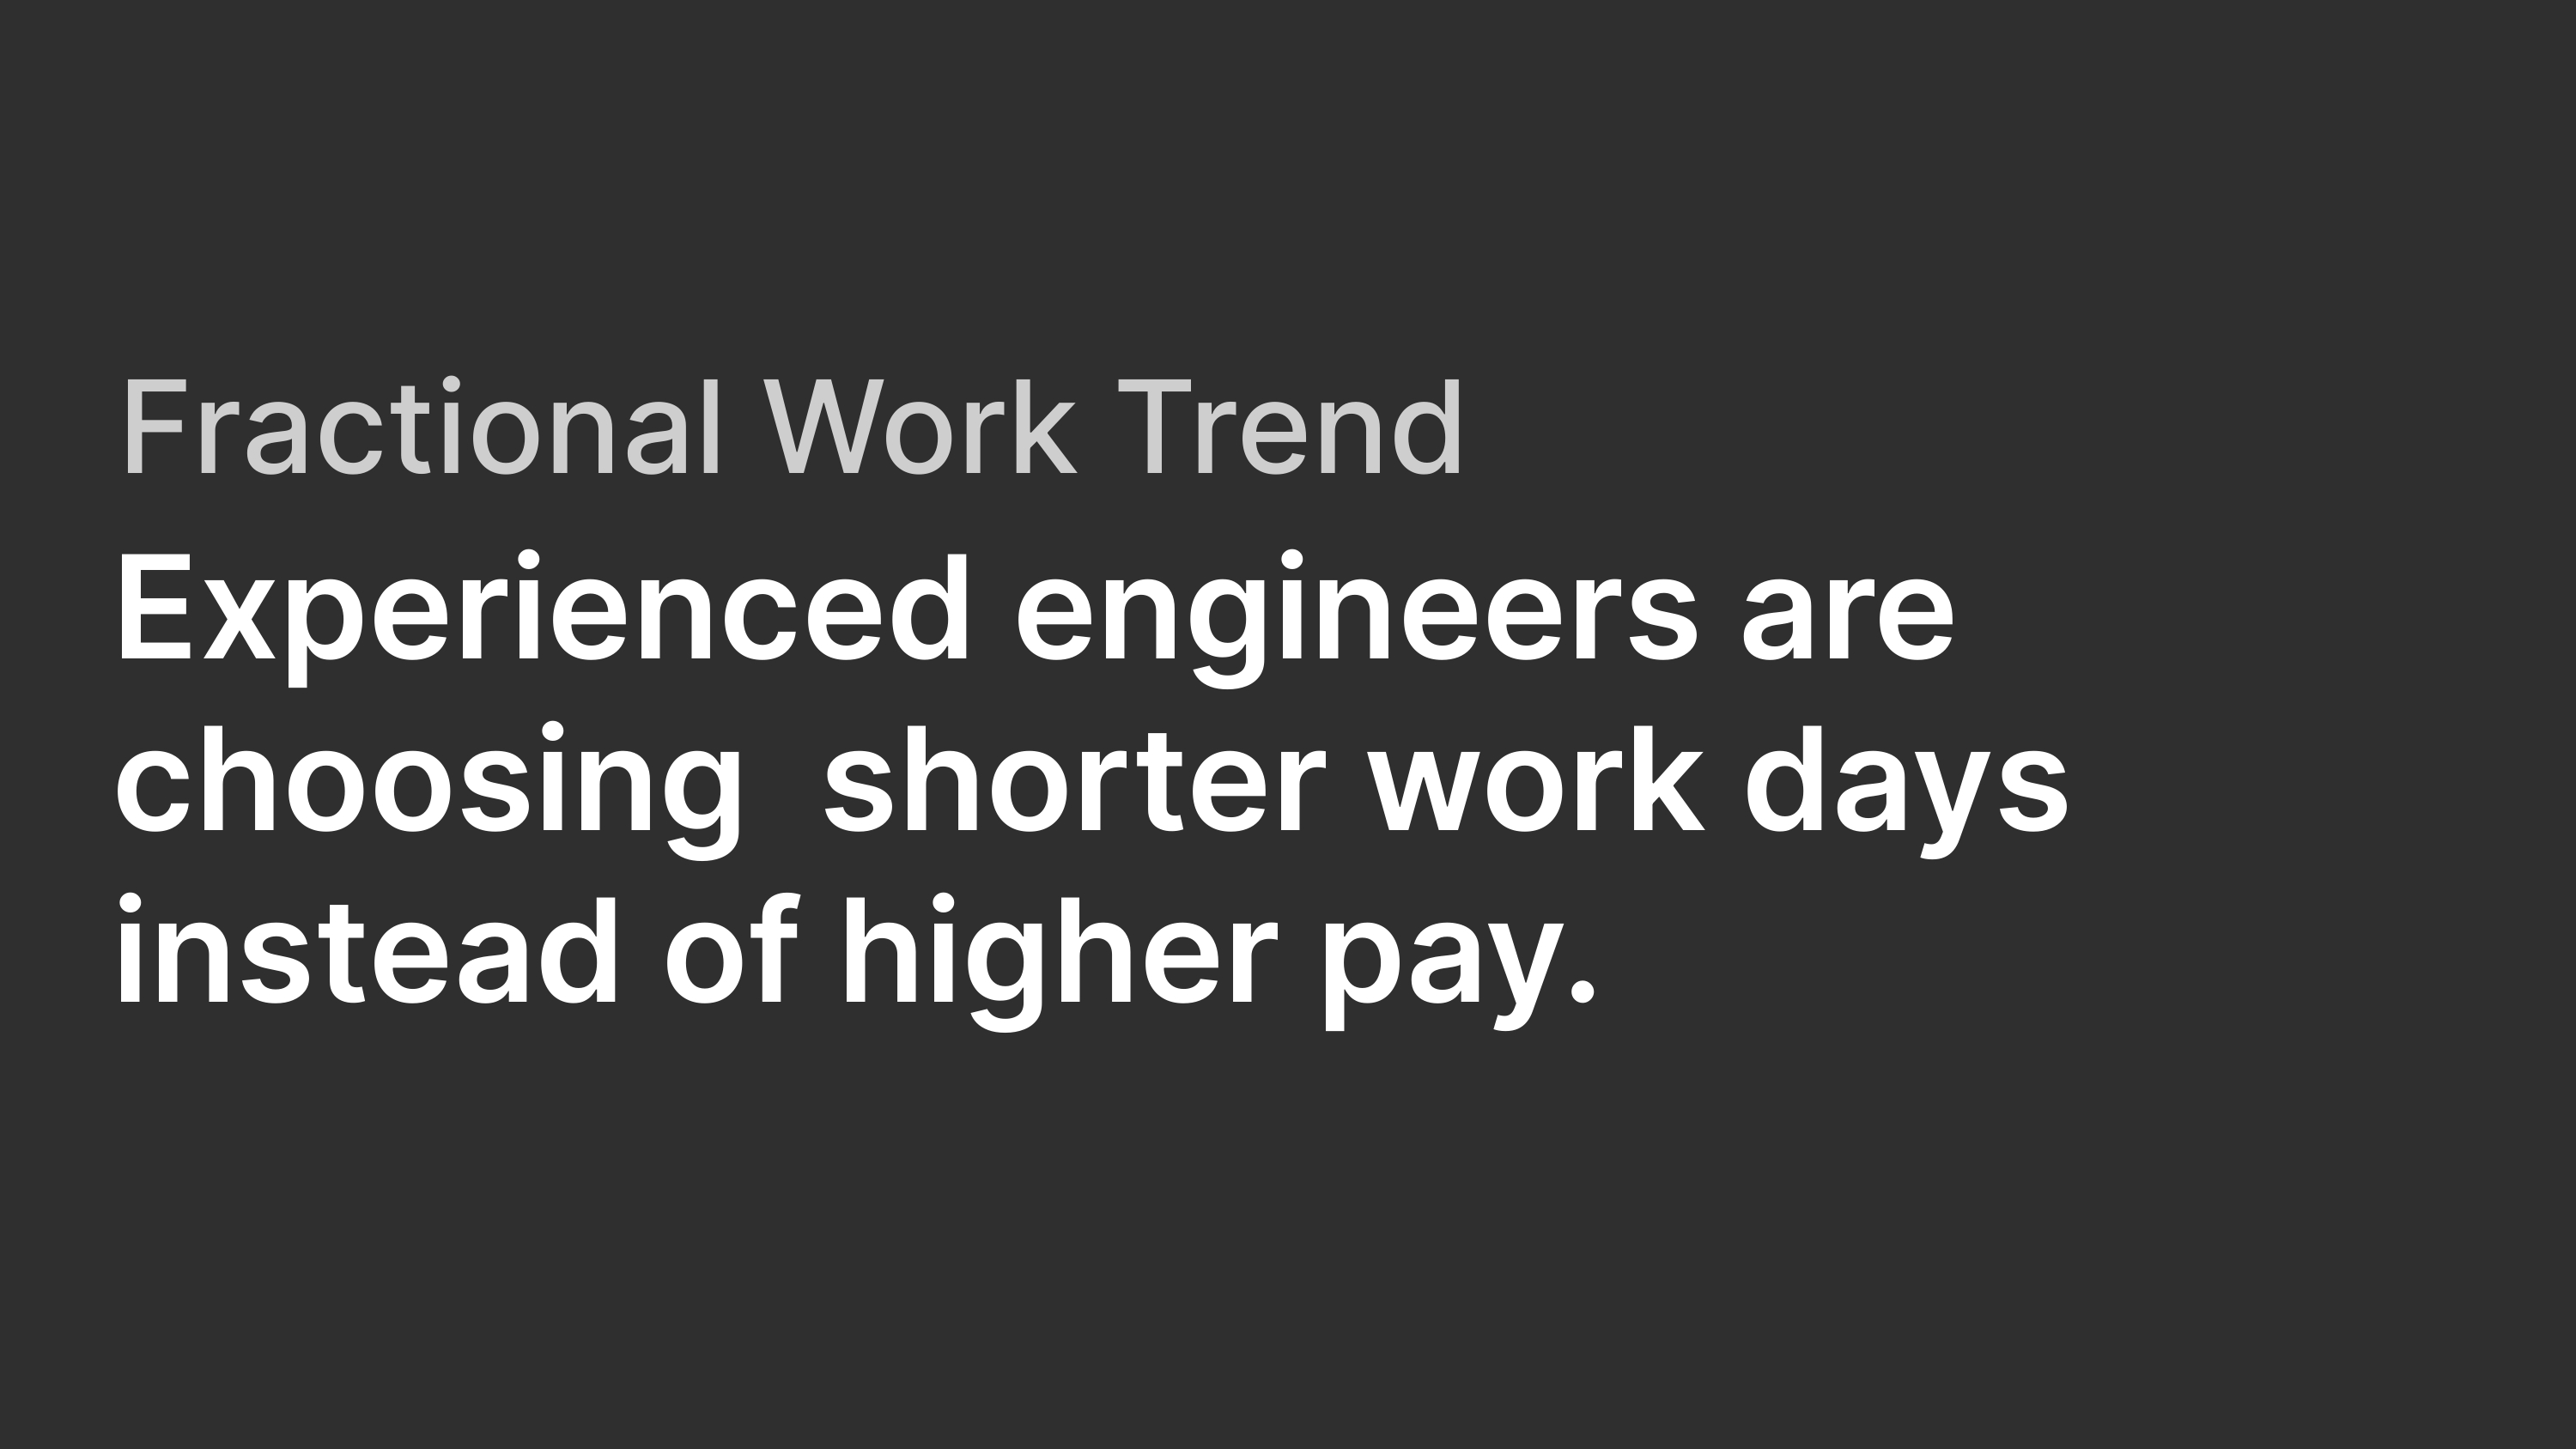 Fractional work trend: Experienced engineers are choosing shorter workdays instead of higher pay.